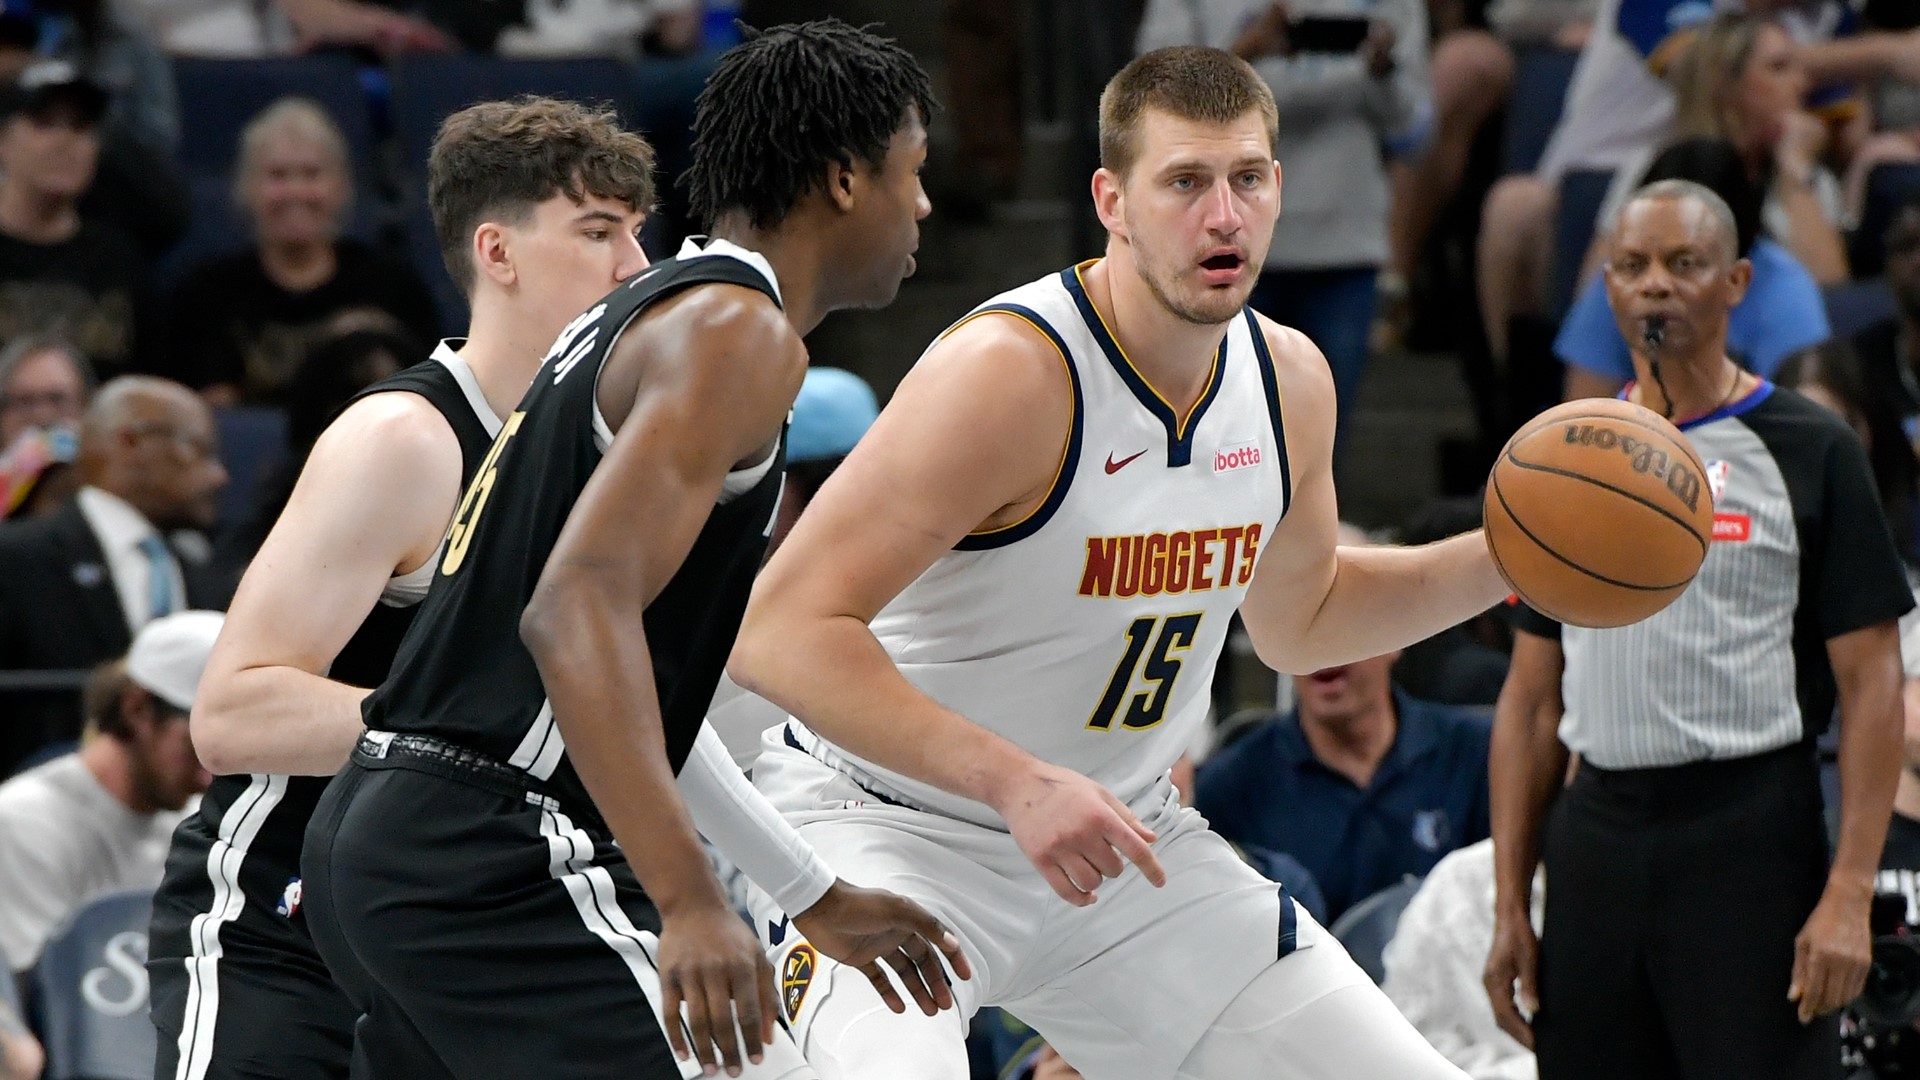 The Denver Nuggets could play the Los Angeles Lakers or the New Orleans Pelicans in the first round of the NBA Playoffs.